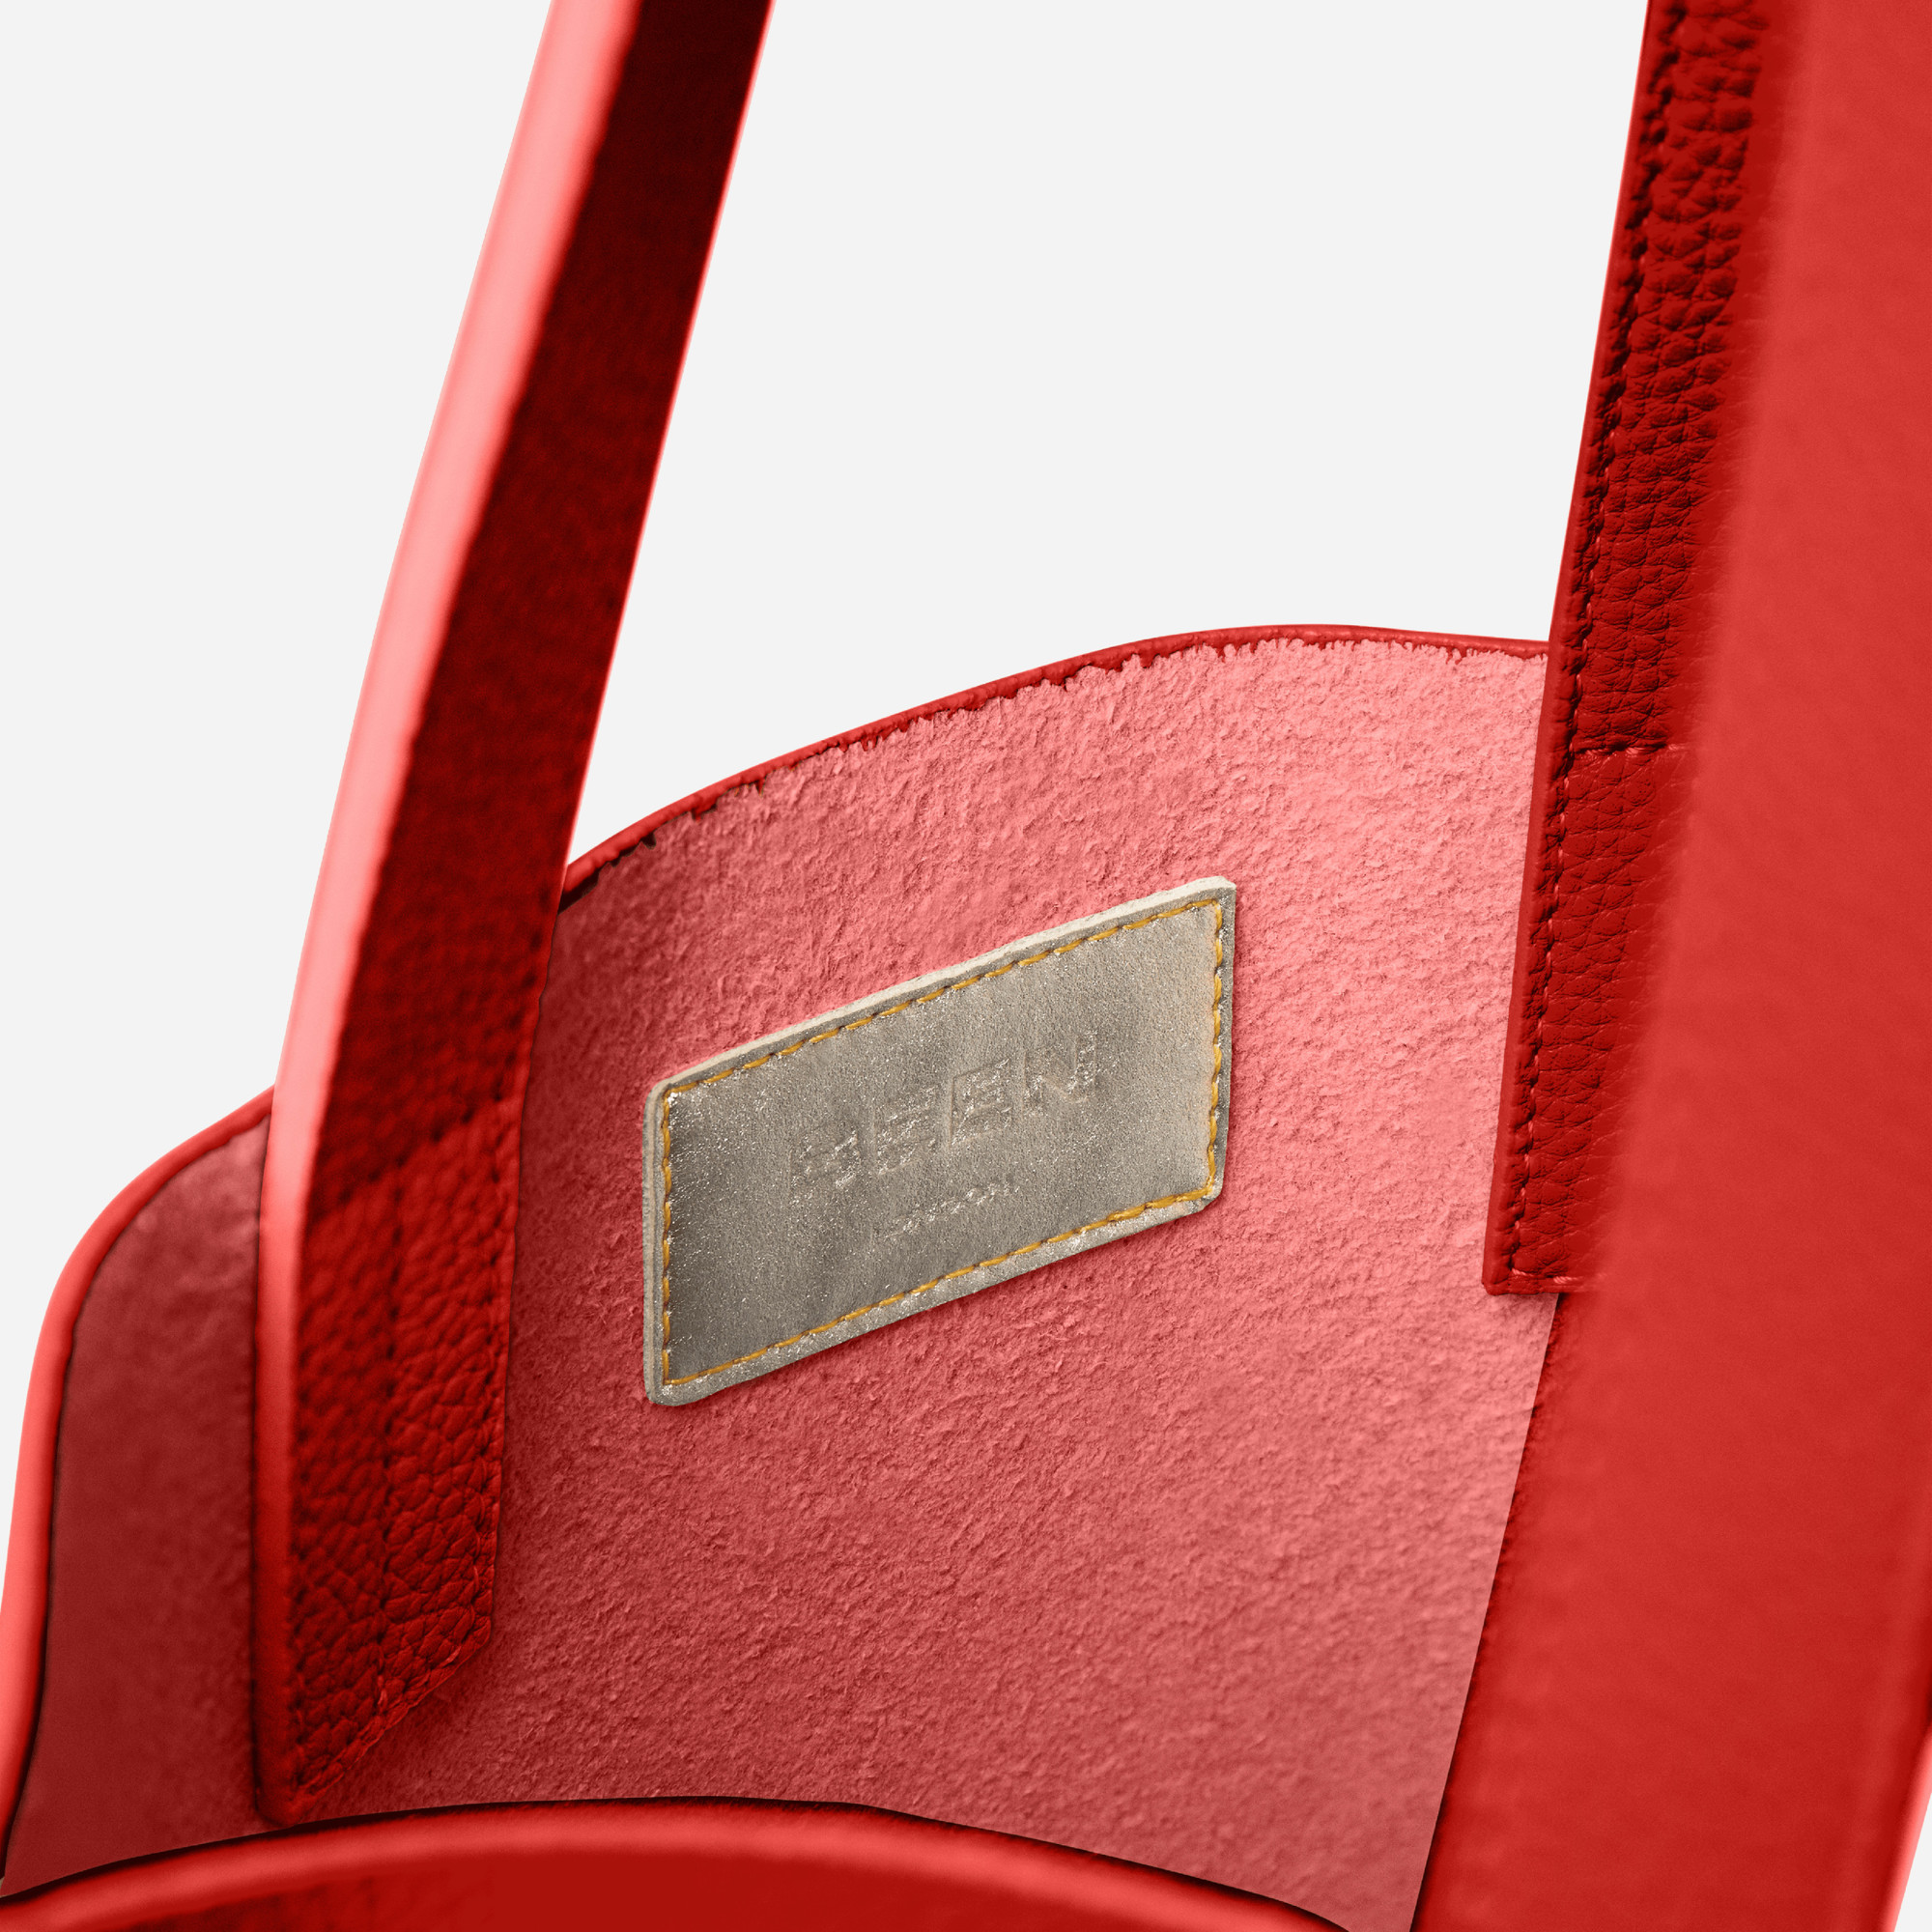 East Tote - Coral Red